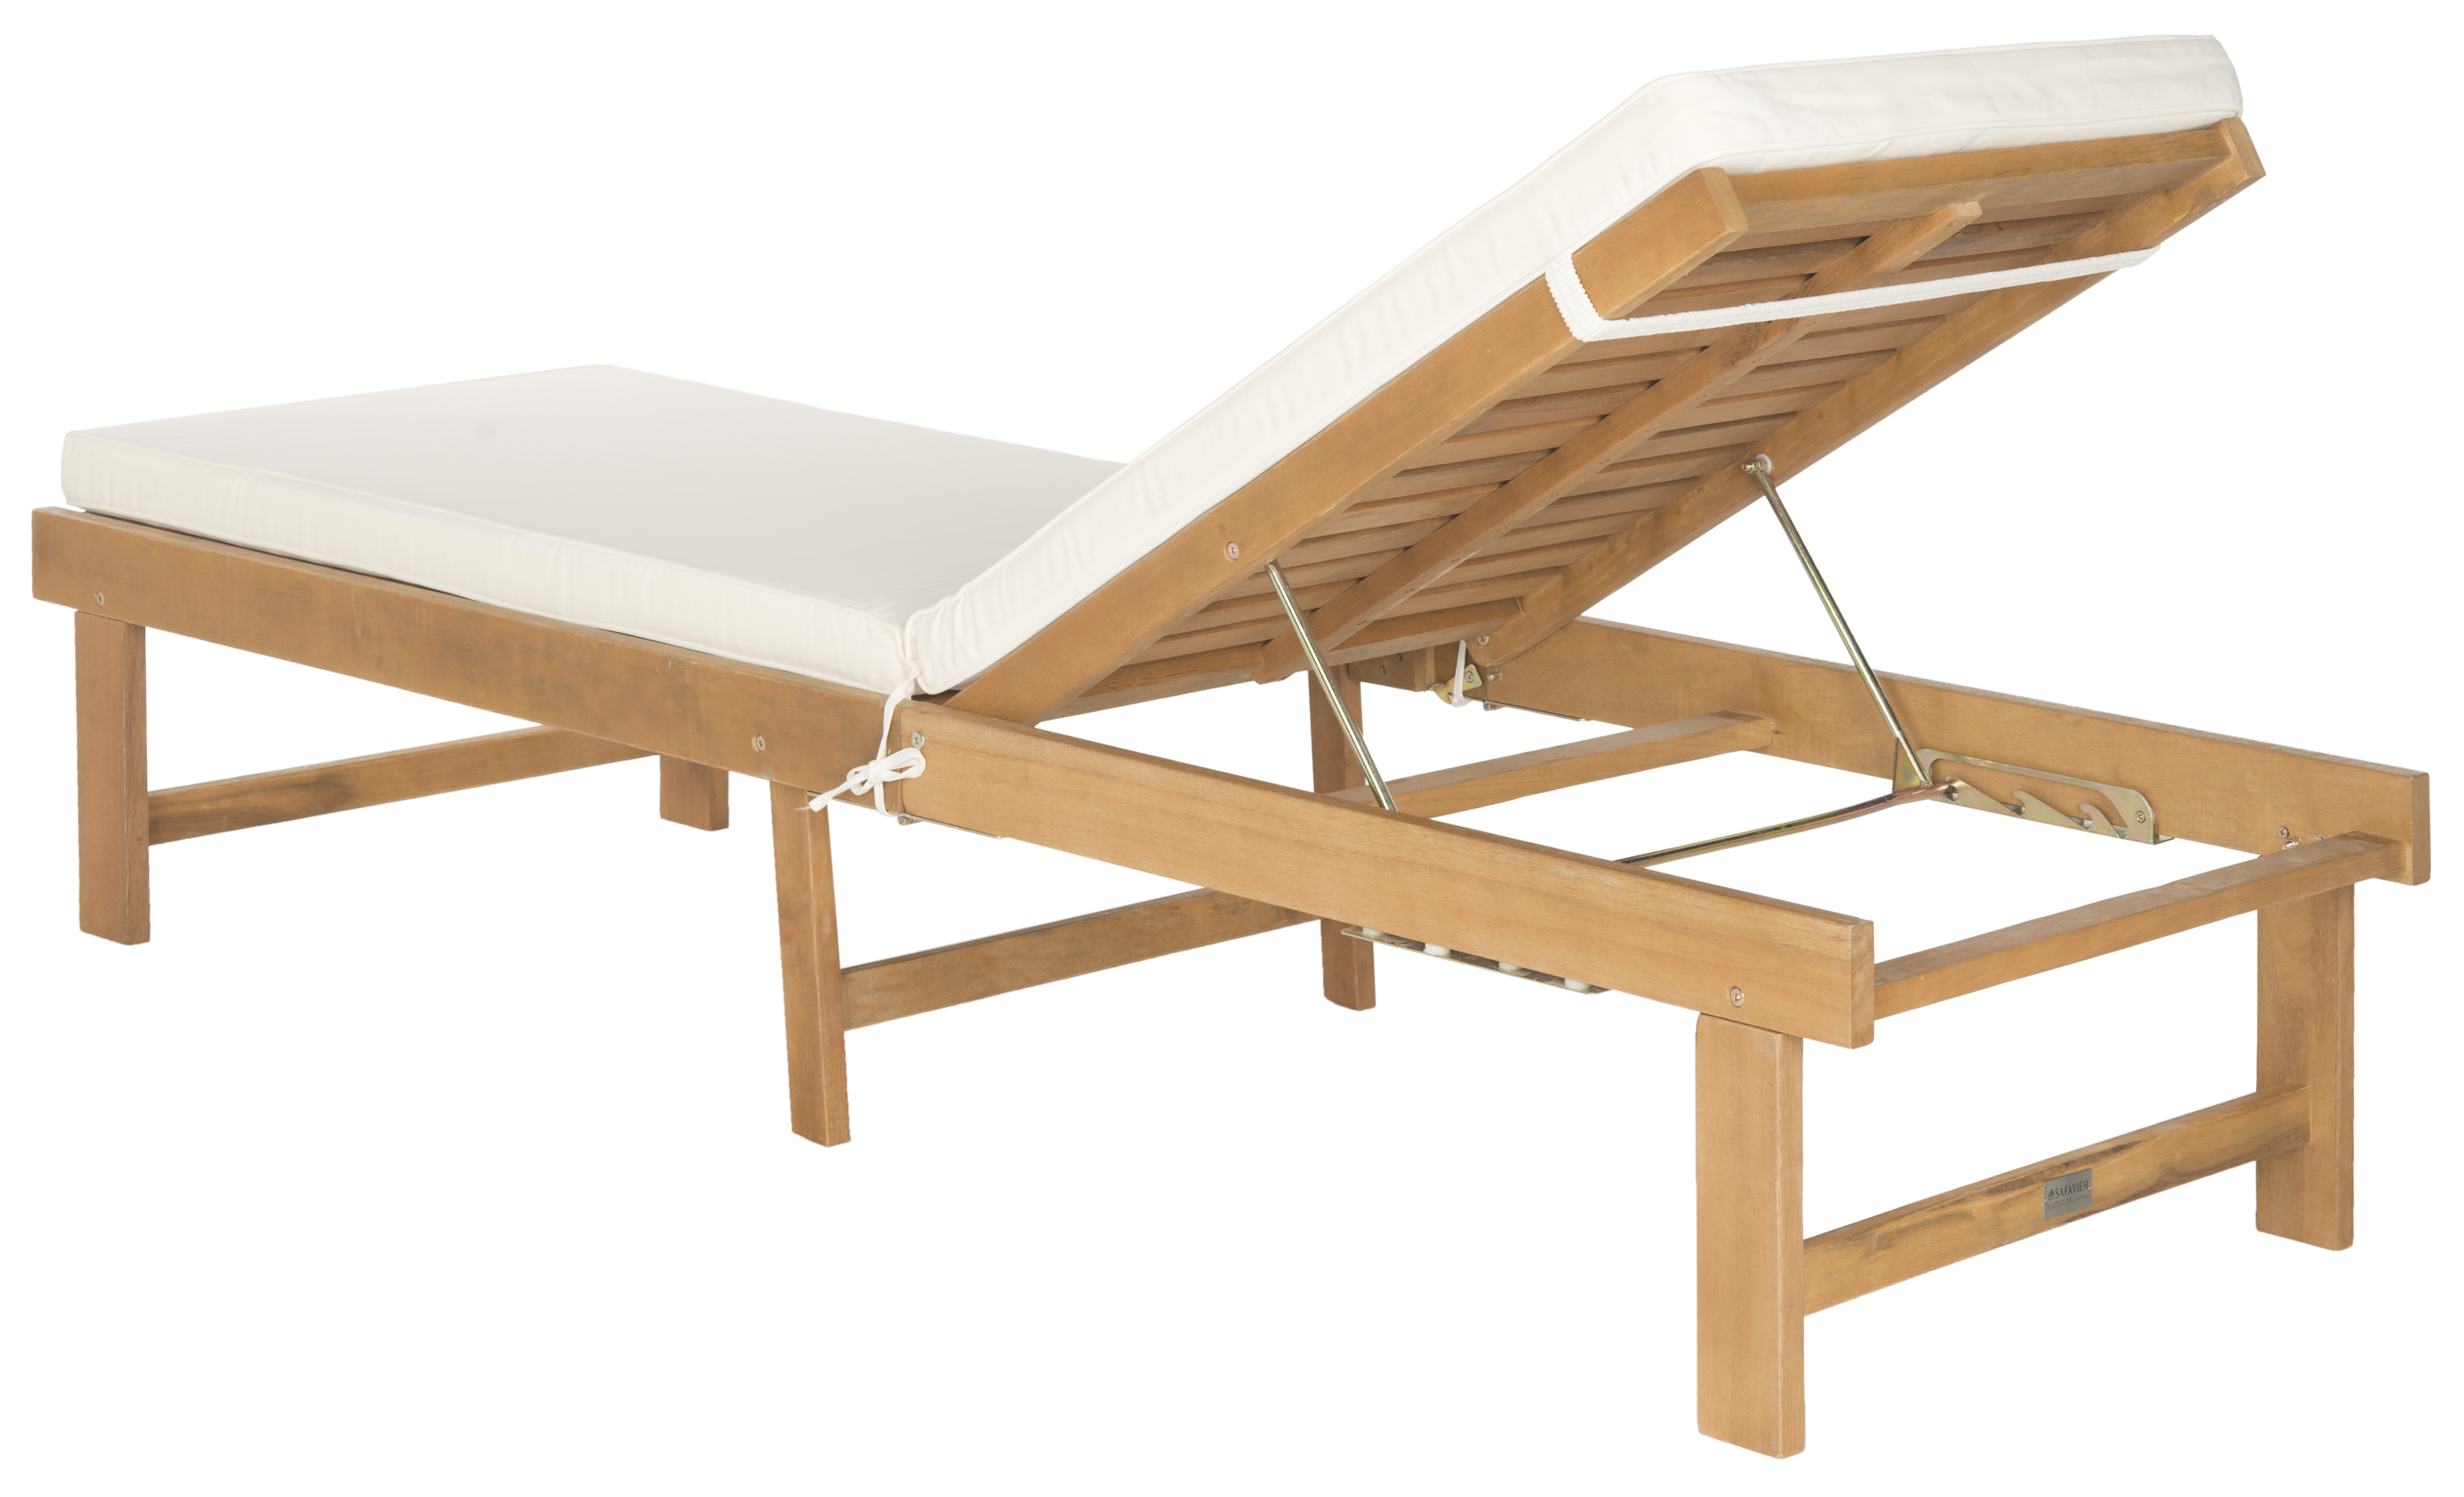 Inglewood Chaise Lounge Chair - Natural/Beige - Arlo Home - Image 2